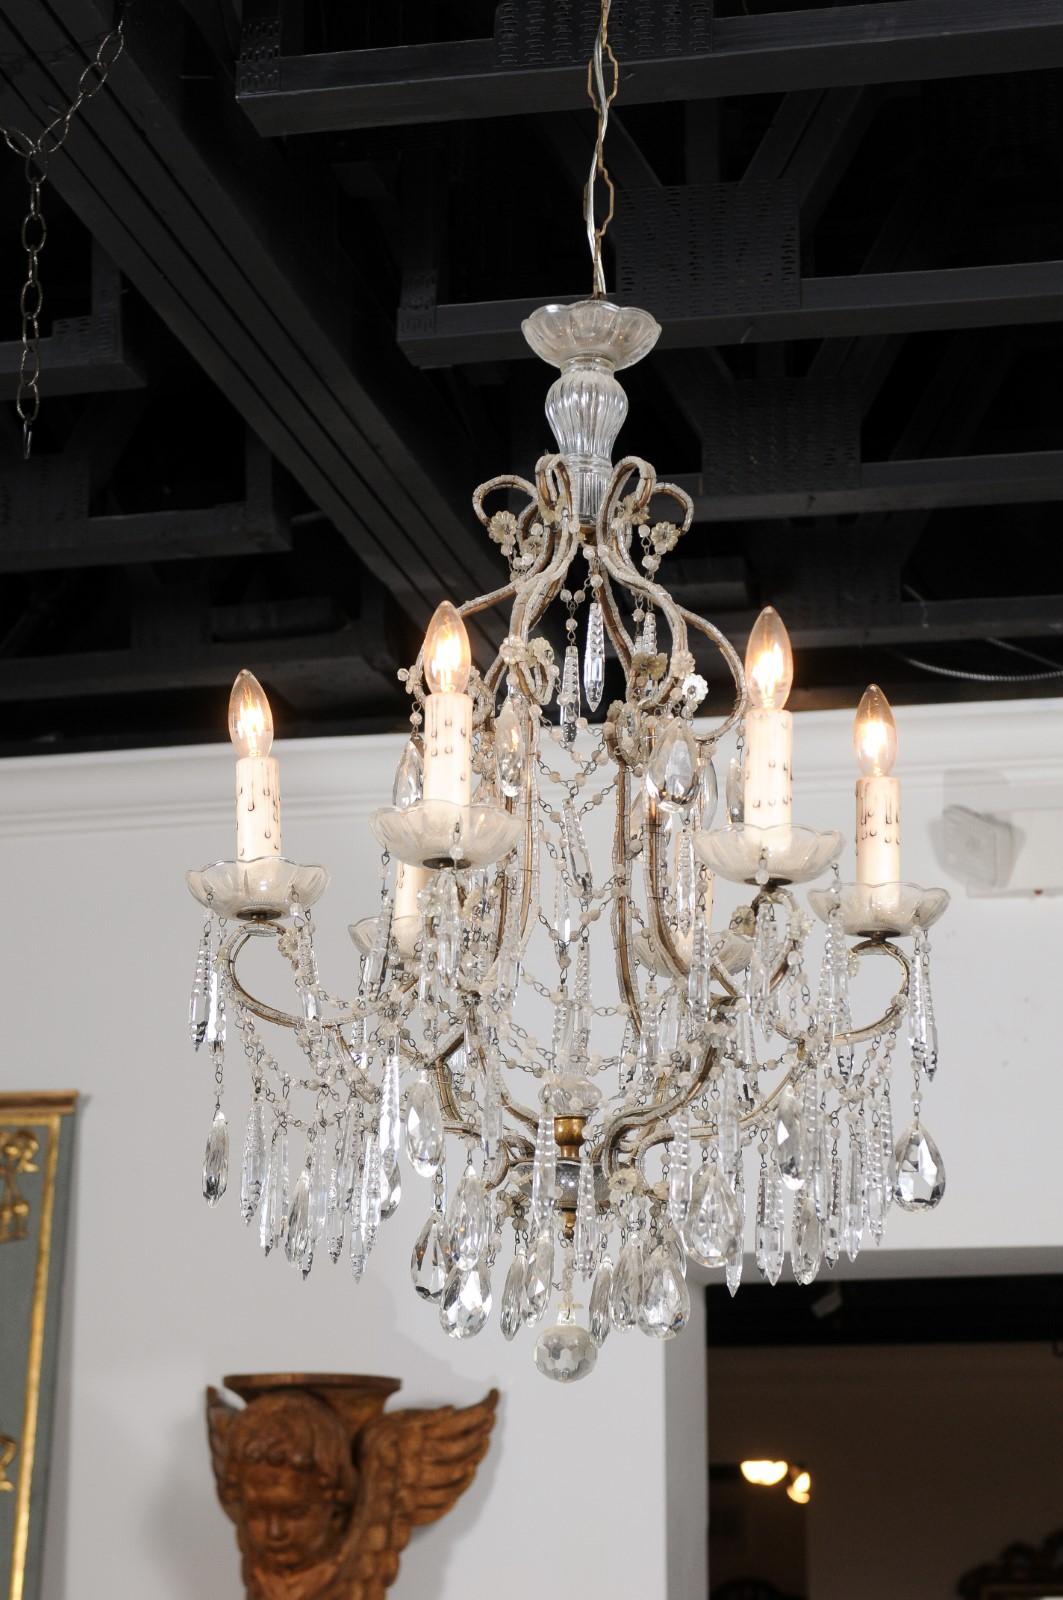 An Italian six-light crystal chandelier from the 19th century, with beaded scrolled arms, spear crystals and etched glass bobèches. Created in Italy during the 19th century, this crystal chandelier features a gilt armature delicately accented with